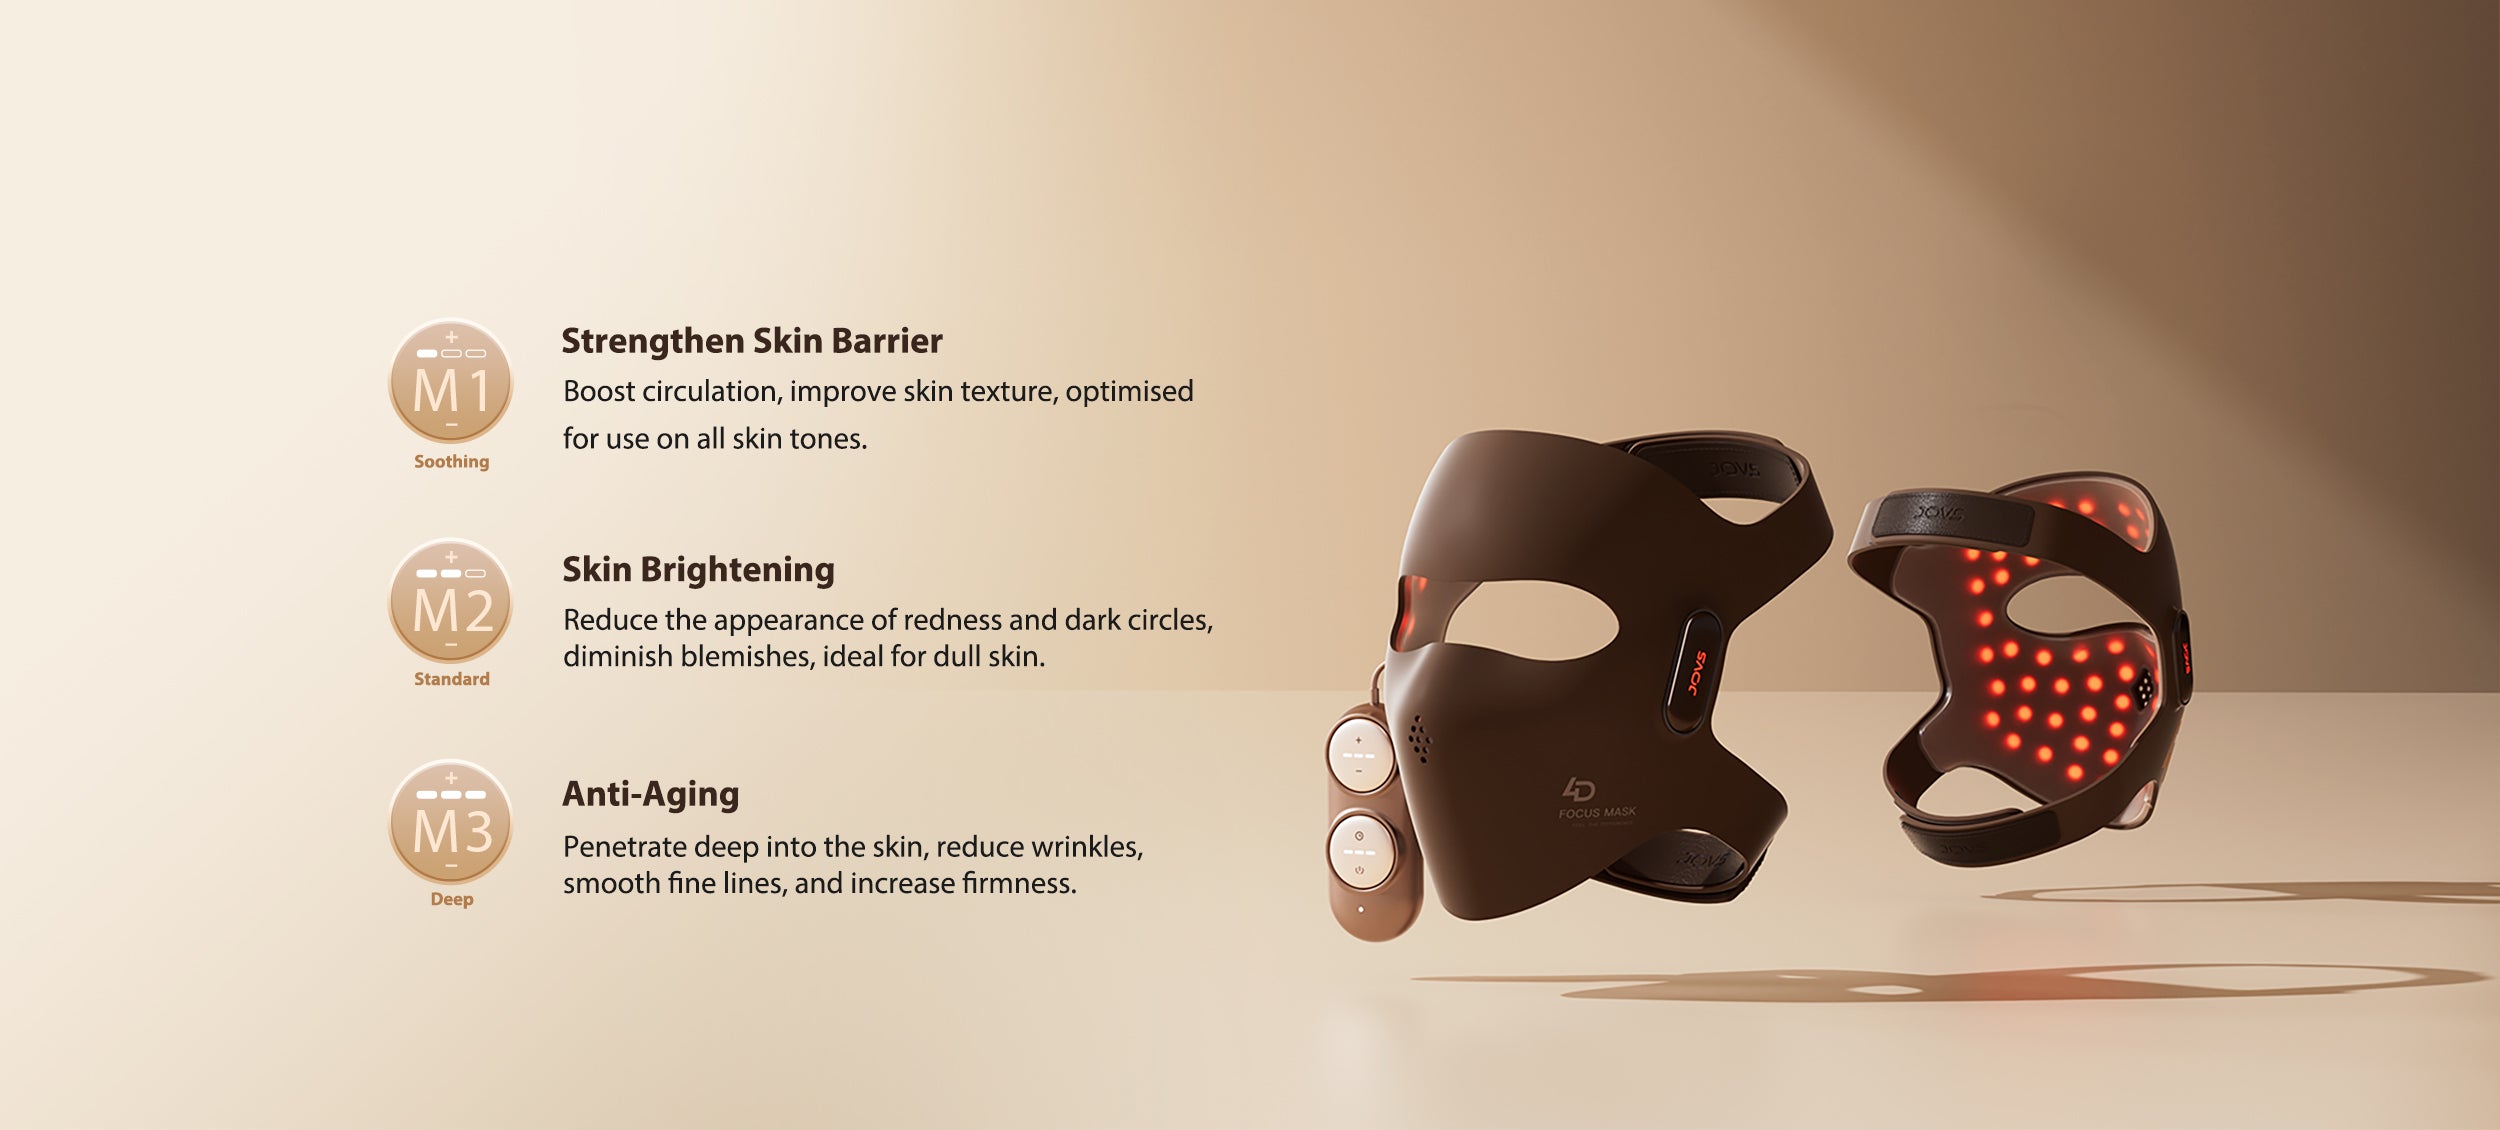 JOVS 4D Laser Light Therapy Mask featuring three modes for skin strengthening, brightening, and anti-aging with detailed benefits for each mode, against a soft beige background.